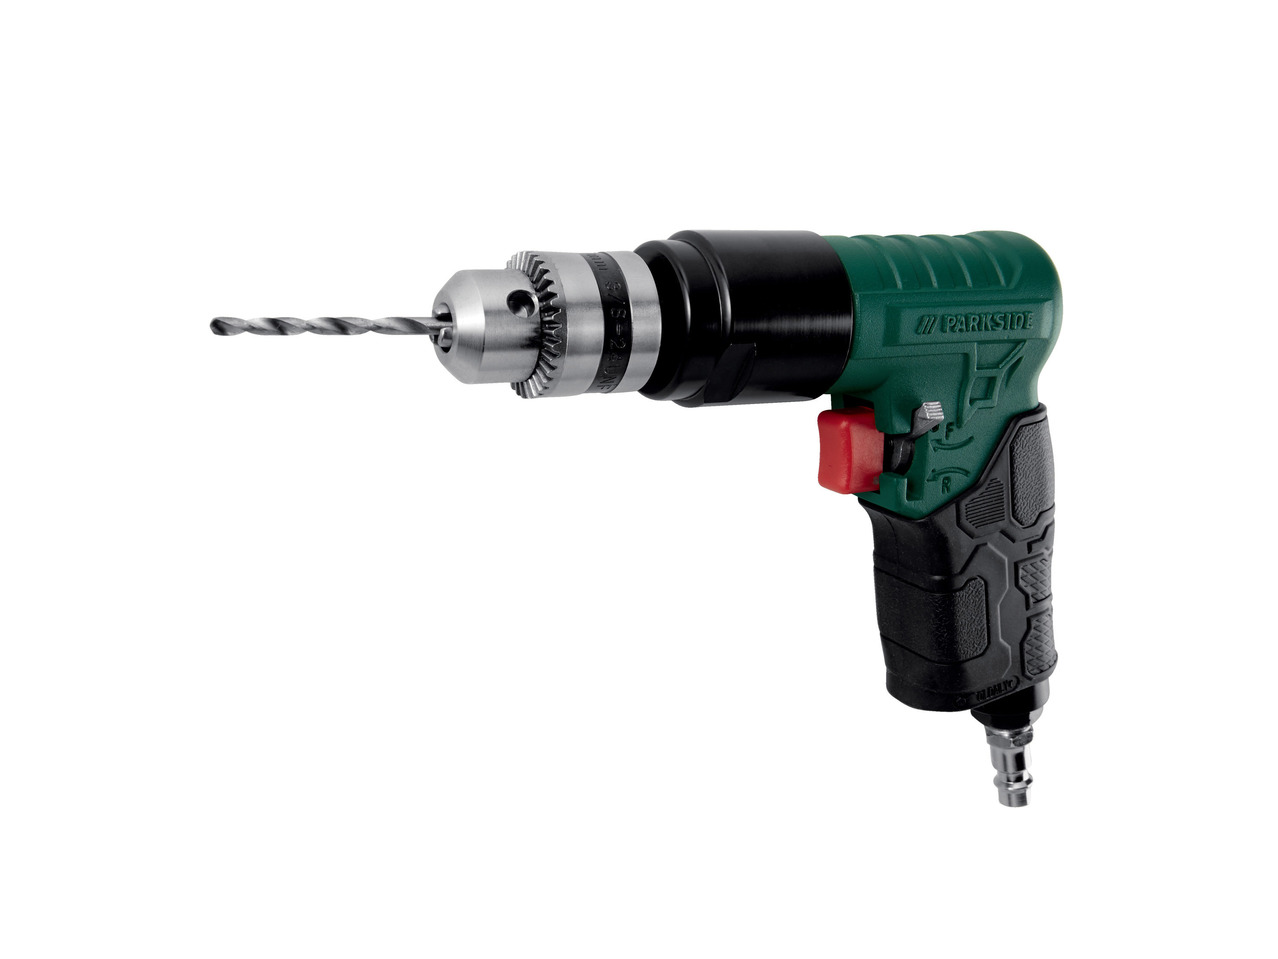 PARKSIDE Pneumatic Drill / Chisel Hammer/ Saw